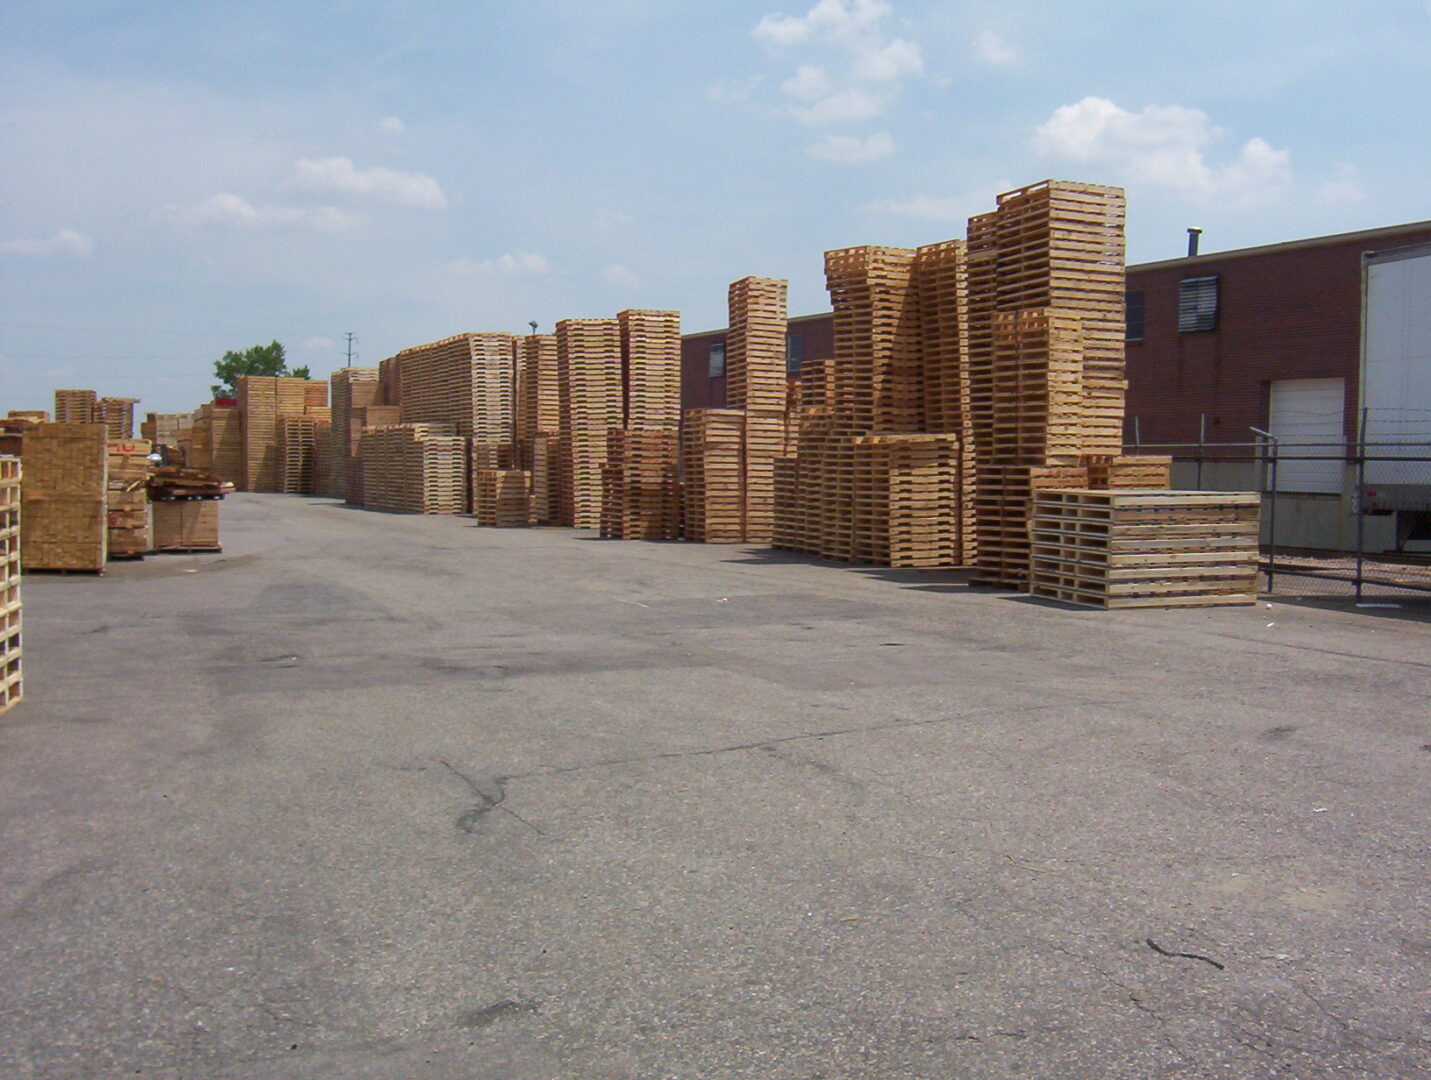 A lot of wood stacked up in the middle of a parking lot.